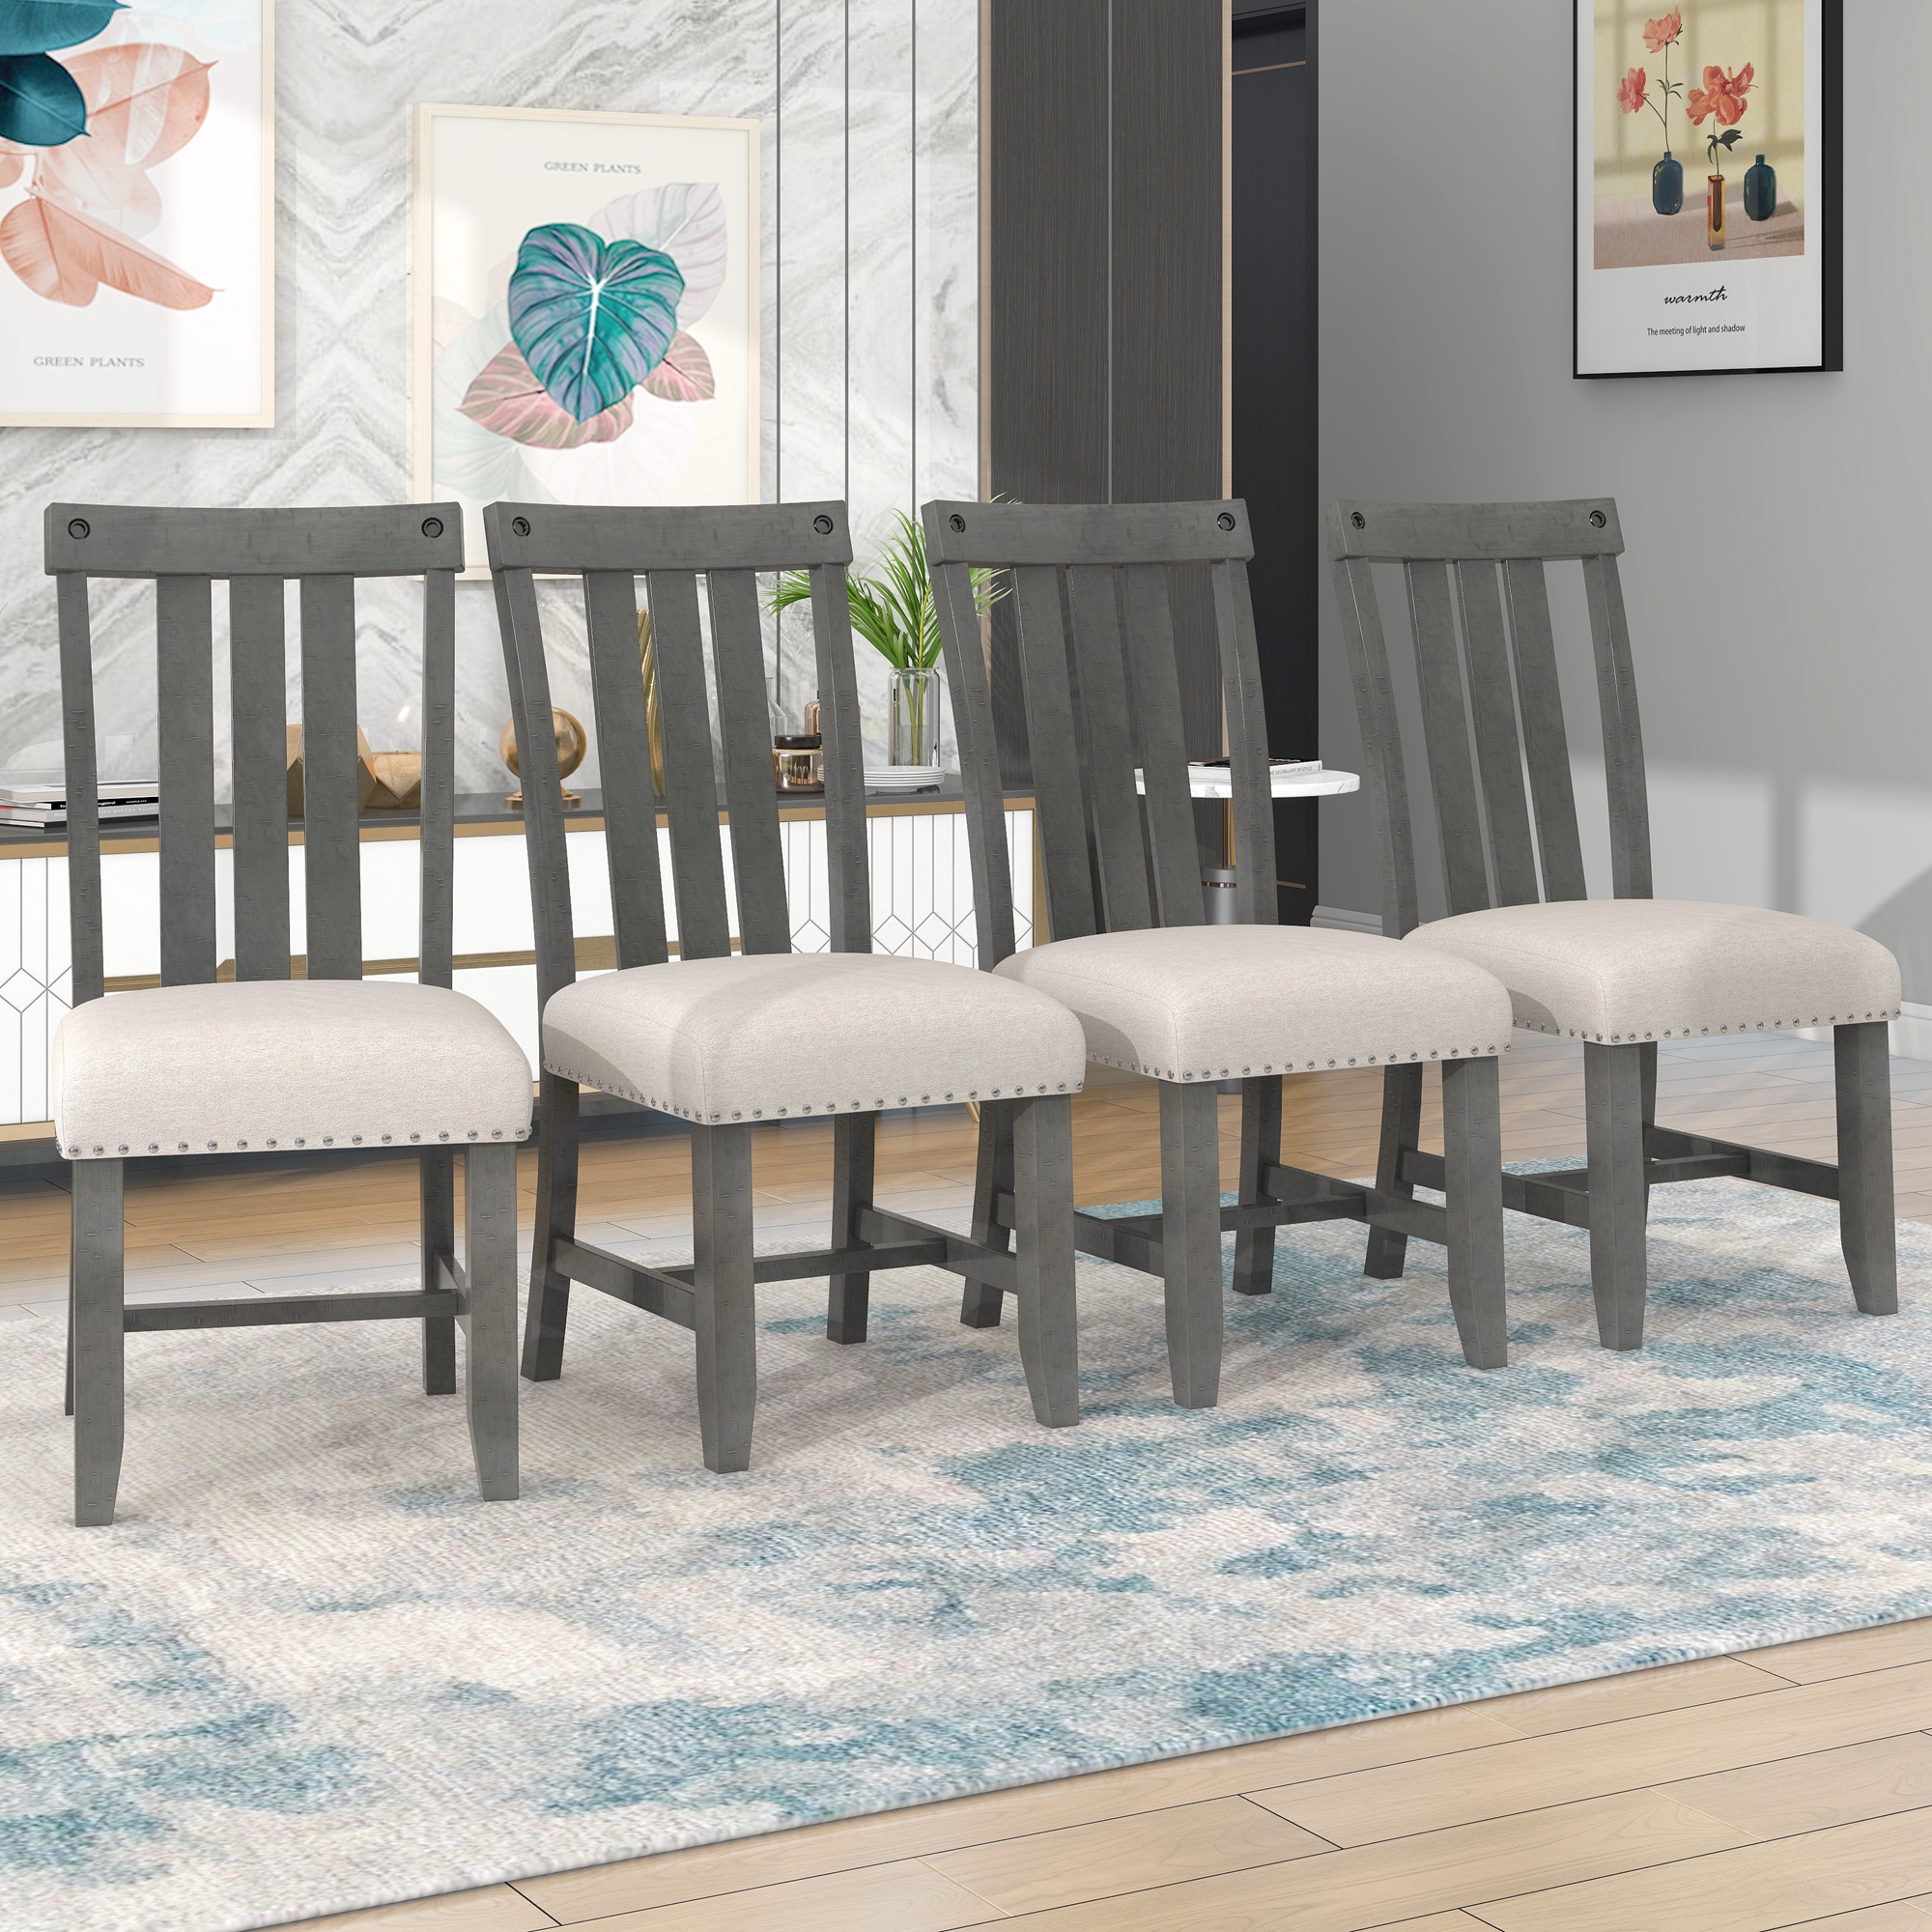 TREXM Set of 4 Fabric Upholstered Dining Chairs with Sliver Nails and Solid Wood Legs (Gray)